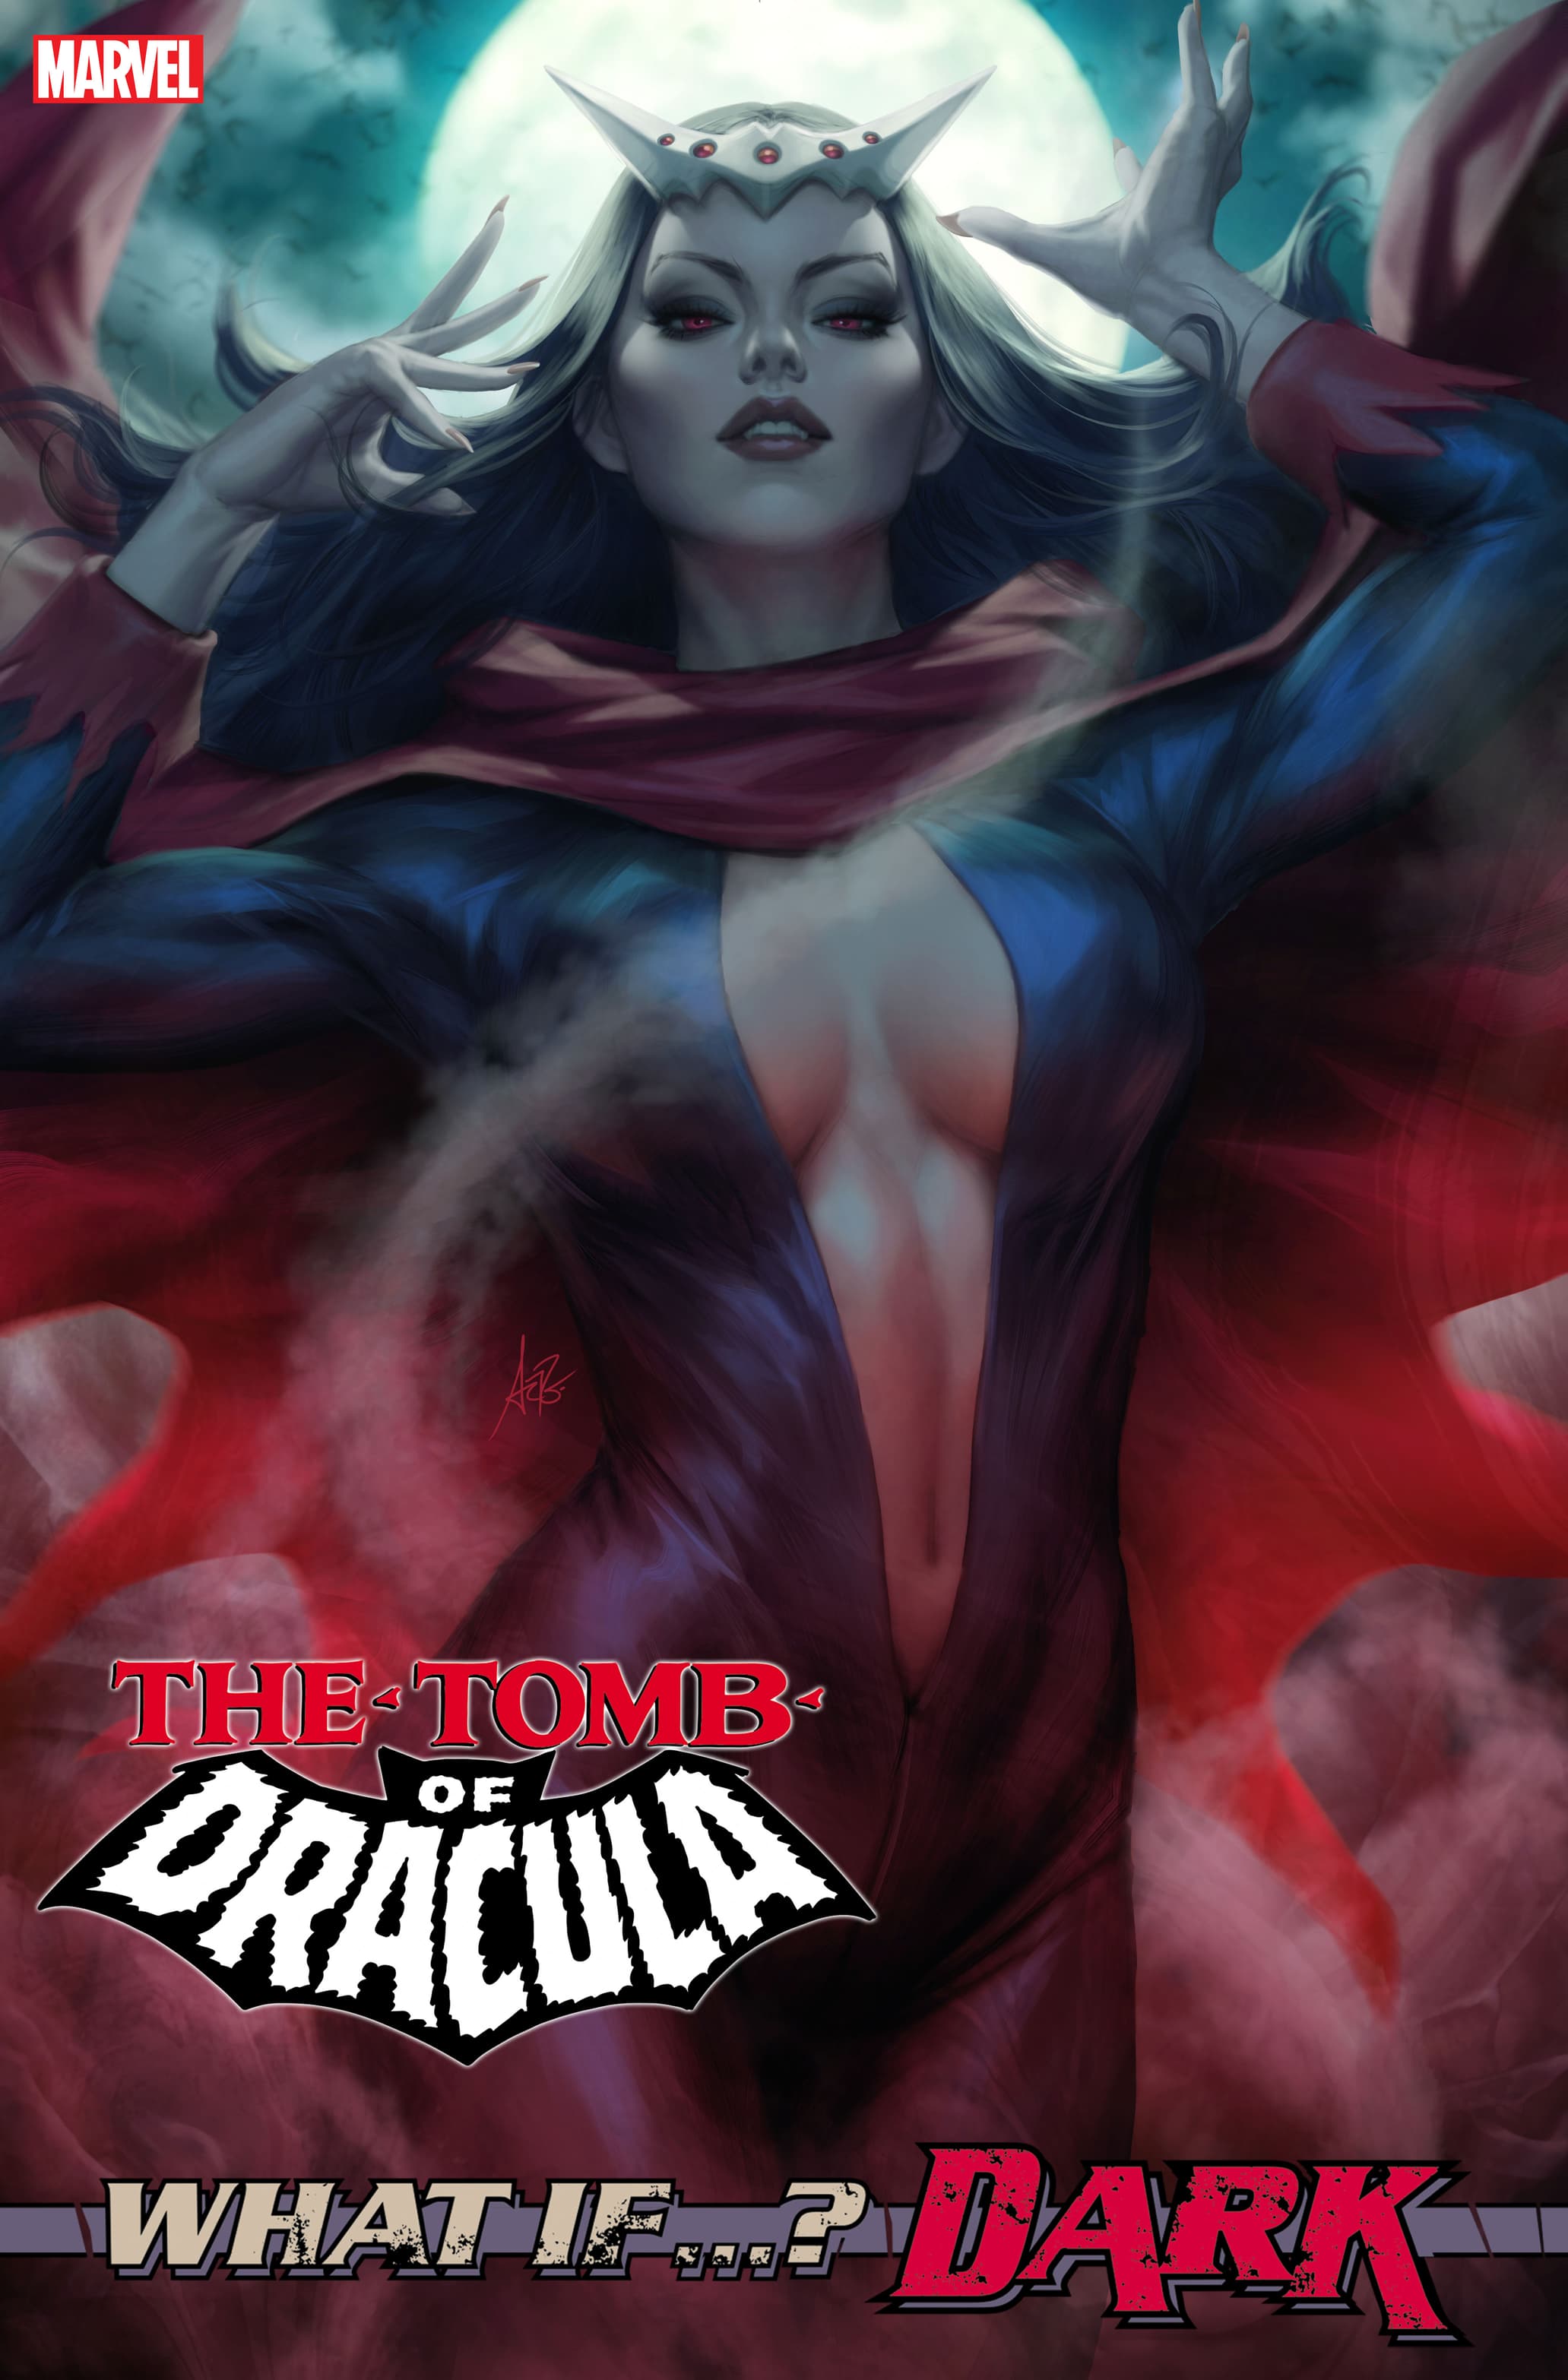 WHAT IF...? DARK: TOMB OF DRACULA #1 variant cover by Stanley "Artgerm" Lau